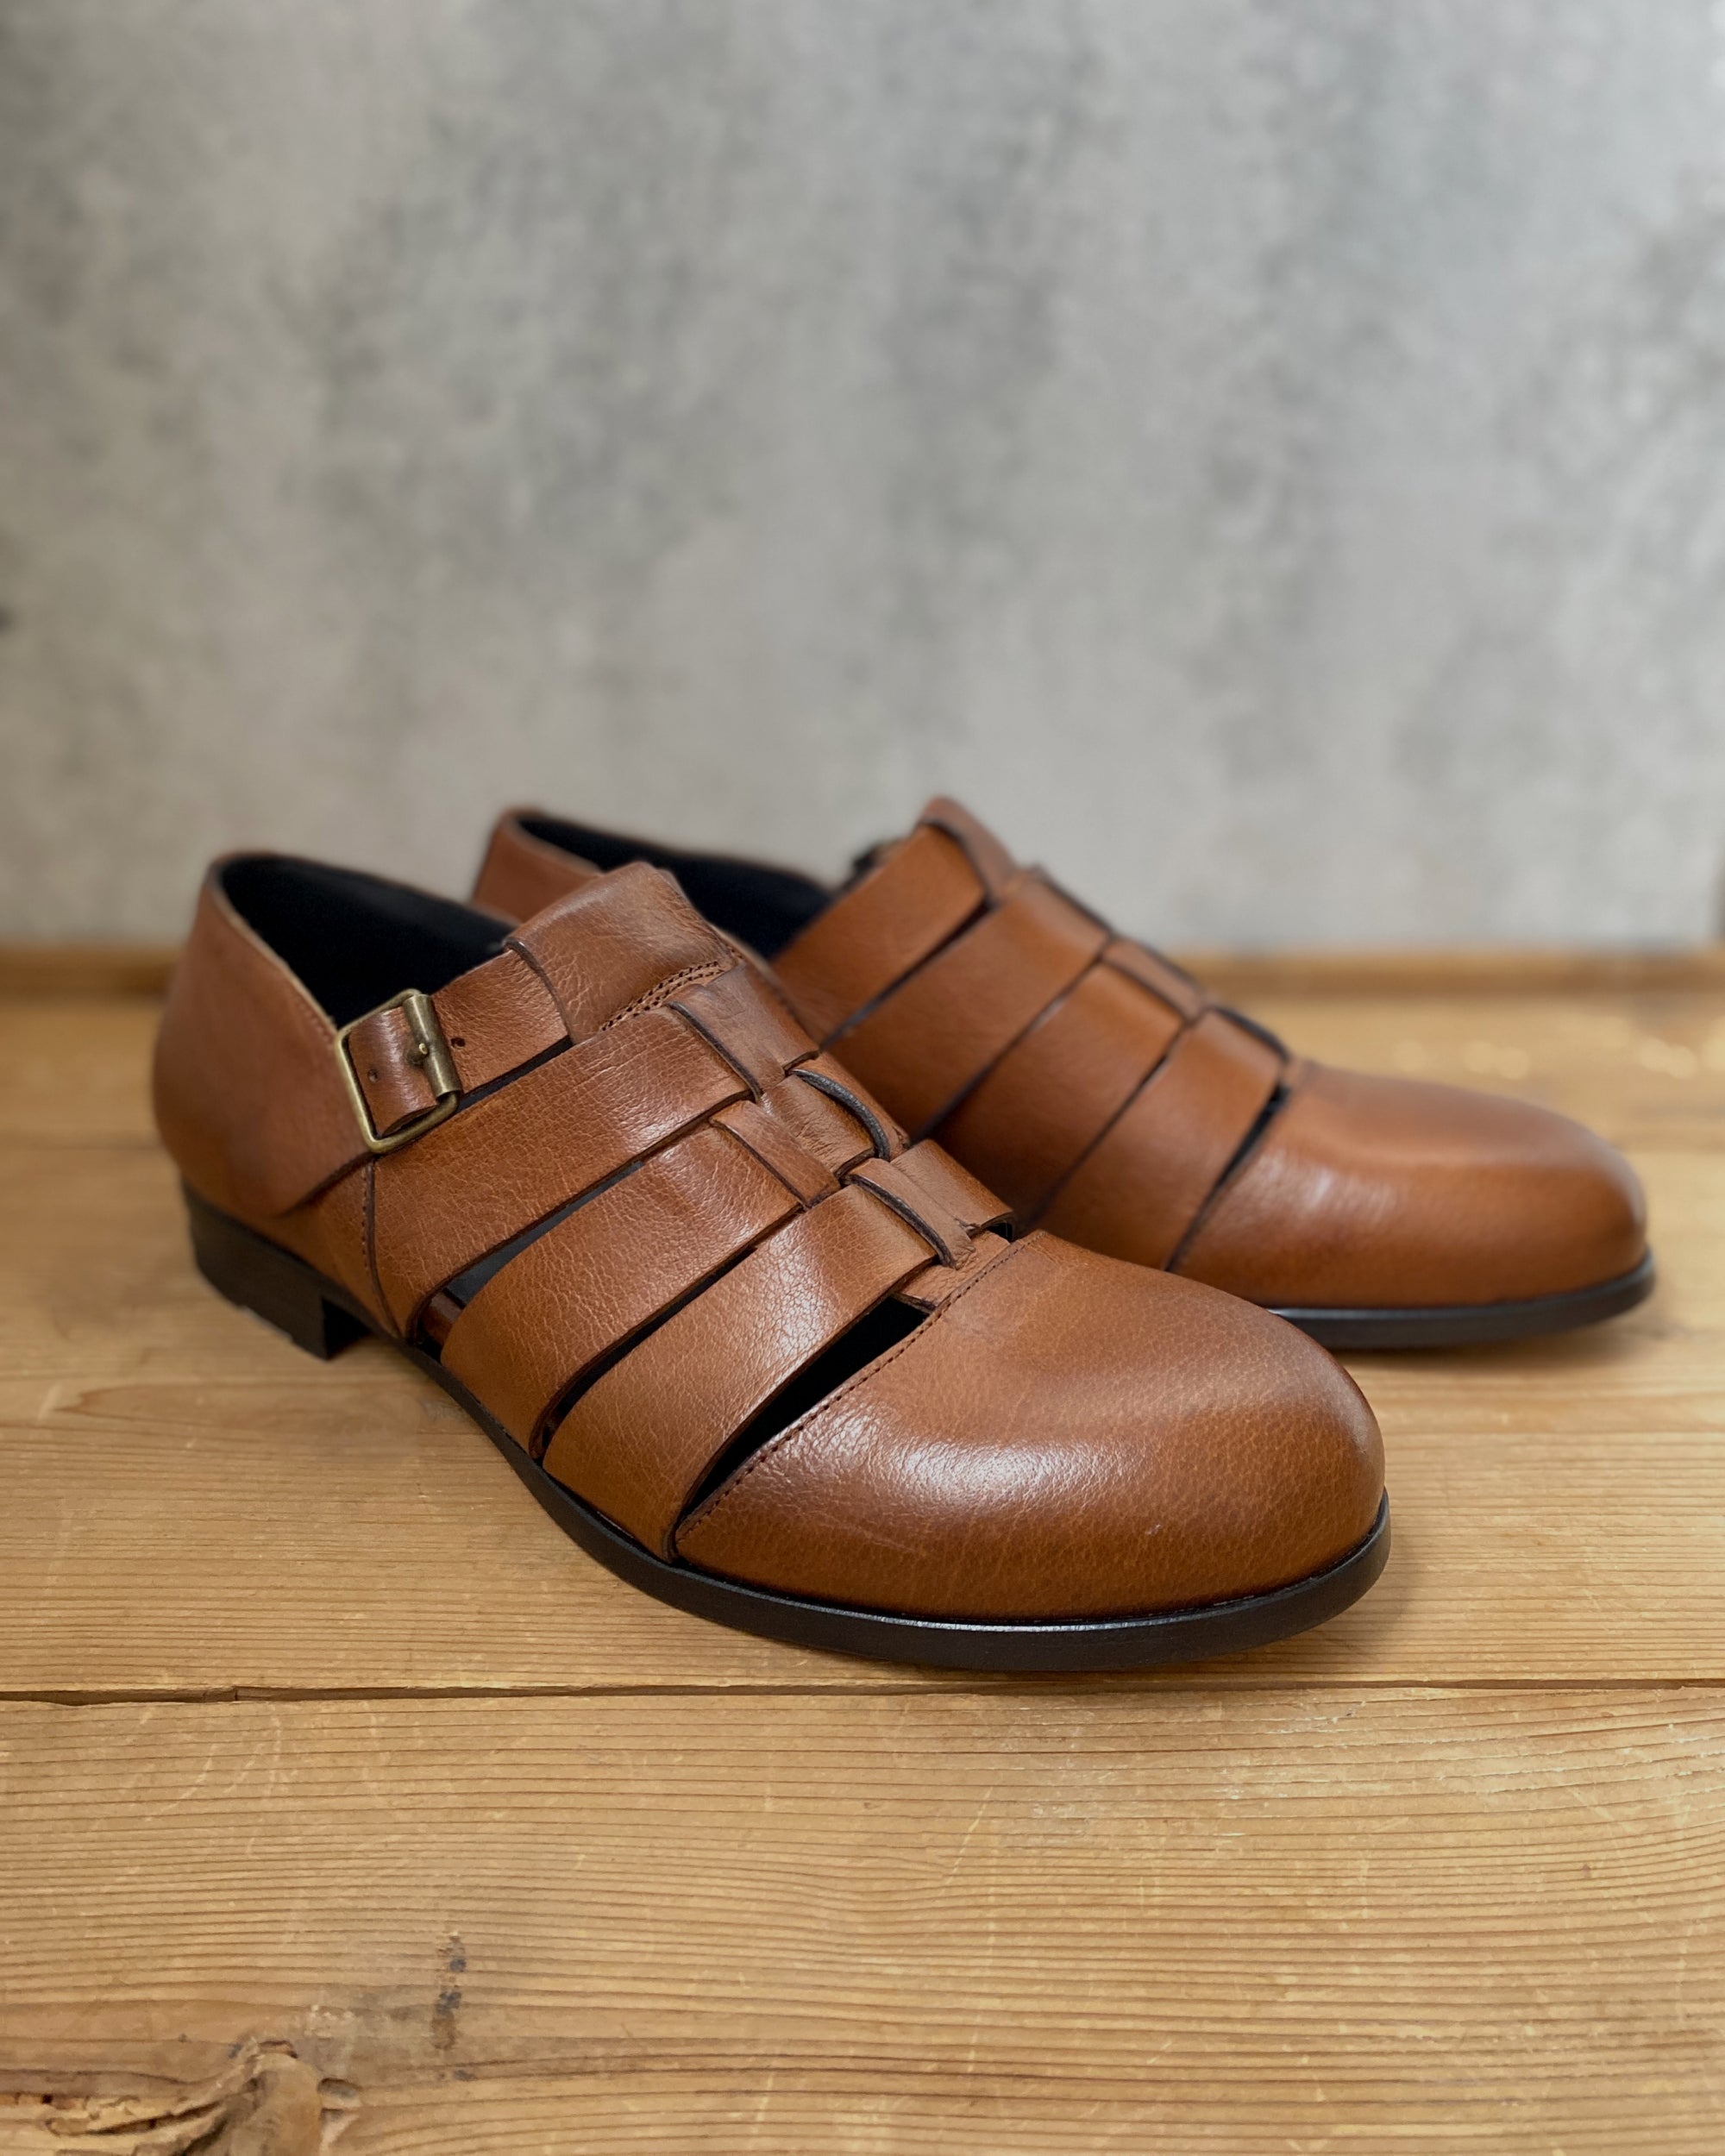 victoria varrasso : posie sandal in toffee side view | the maker hobart